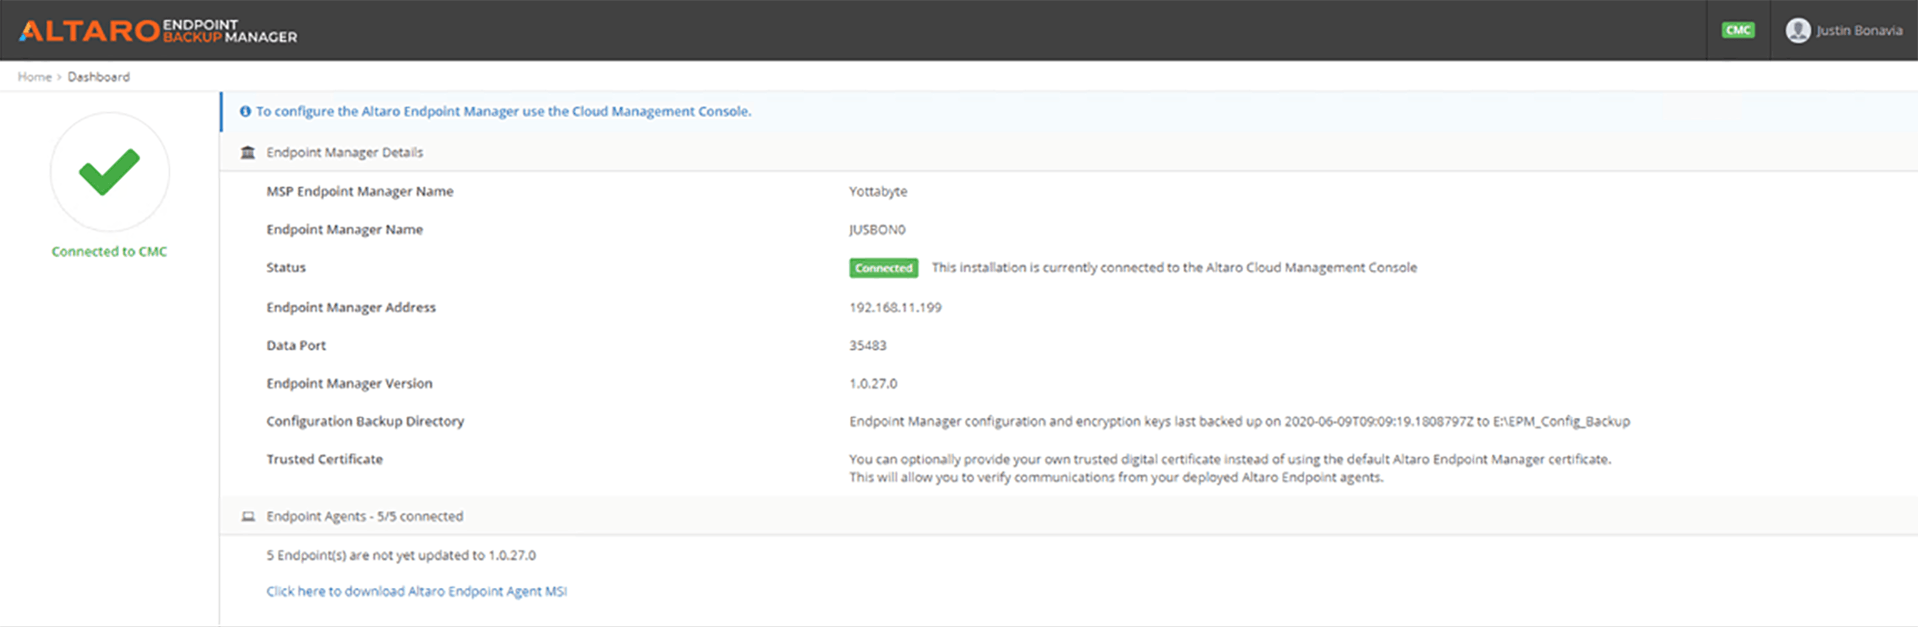 Altaro Endpoint Backup Manager